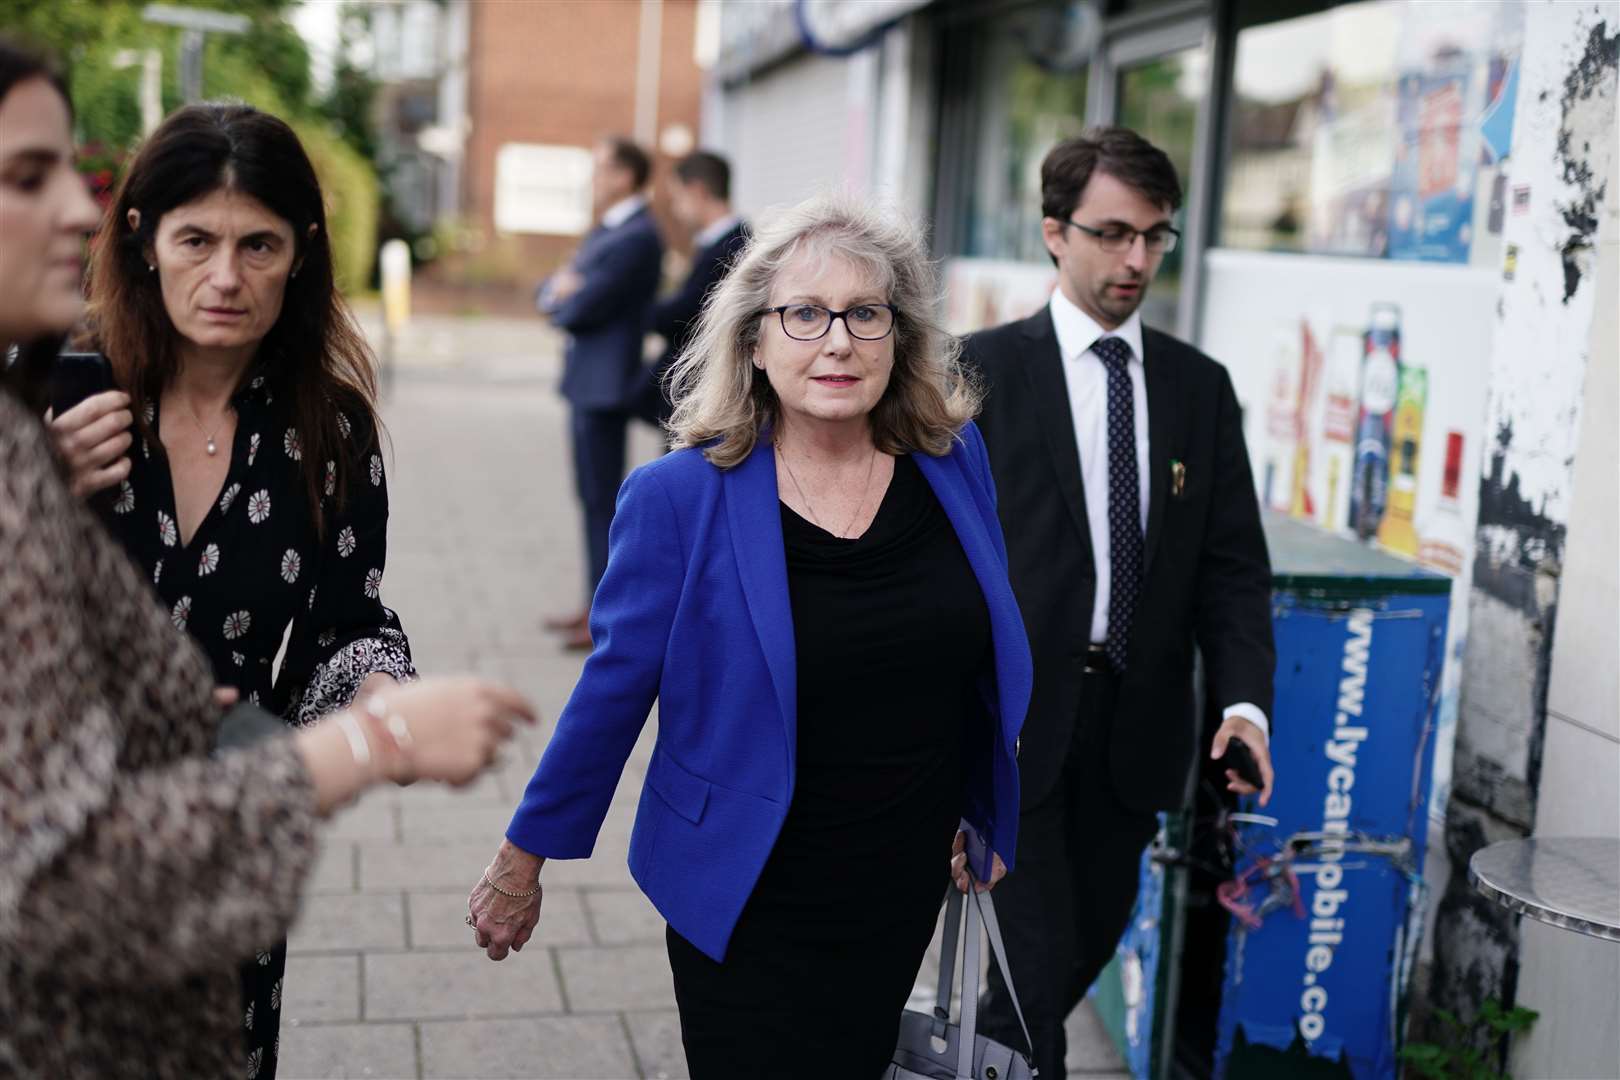 The mayor’s campaign has framed the May 2 vote as a ‘neck-and-neck’ two-horse race between Labour and the Tory candidate Susan Hall, pictured (Jordan Pettitt/PA)